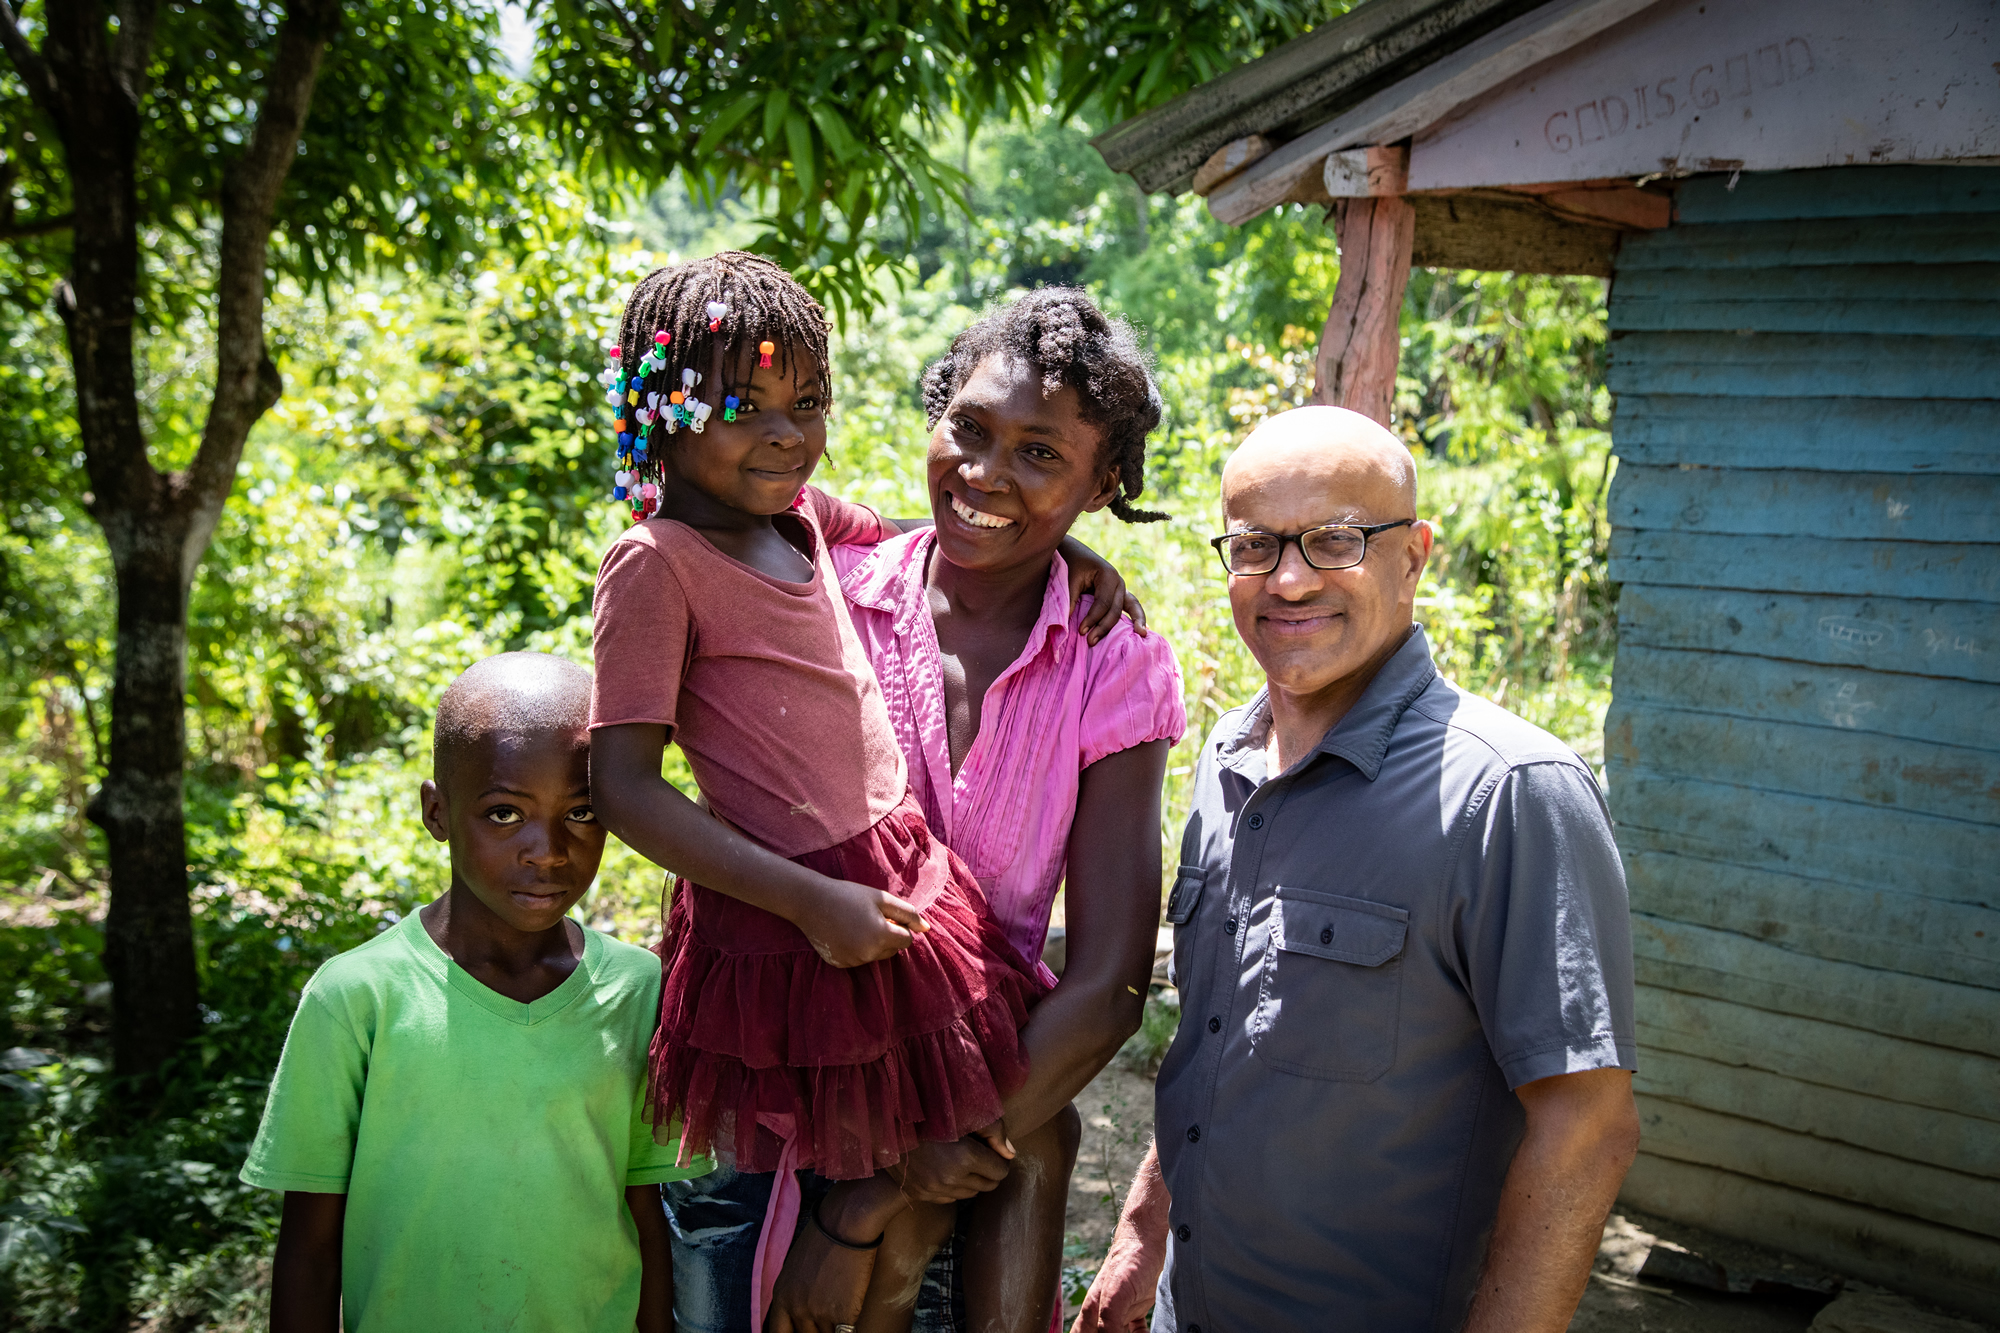 After finding success on Wall Street, Atul Tandon turned back to help those he left behind. In this image, Tandon is in Haiti